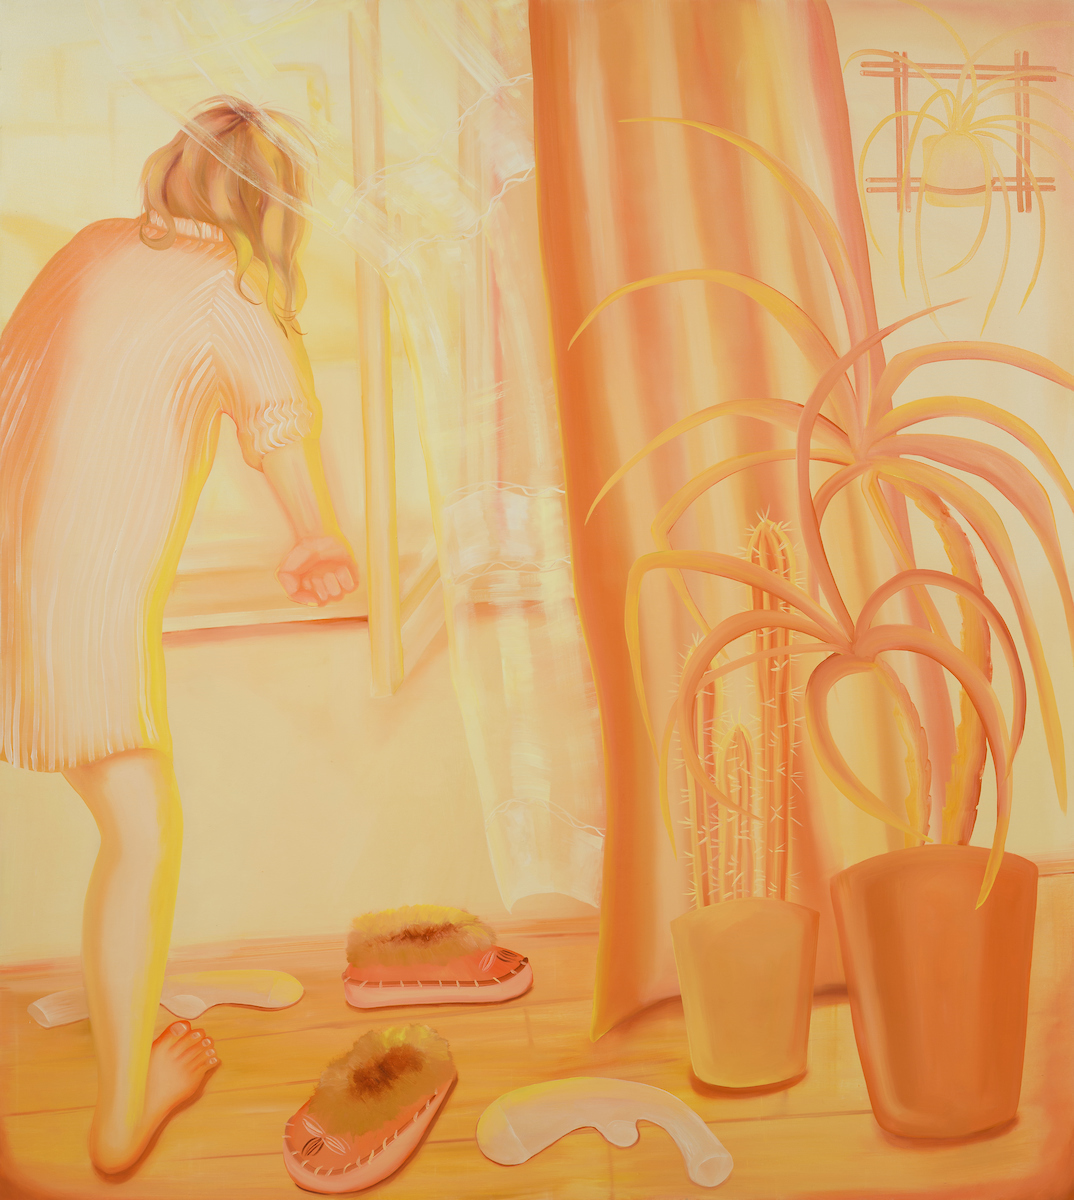 Karolina Jablońska. <em>Looking out the Window (yellow)</em>, 2021. Oil on canvas, 74 3/4 x 66 7/8 inches (190 x 170 cm)